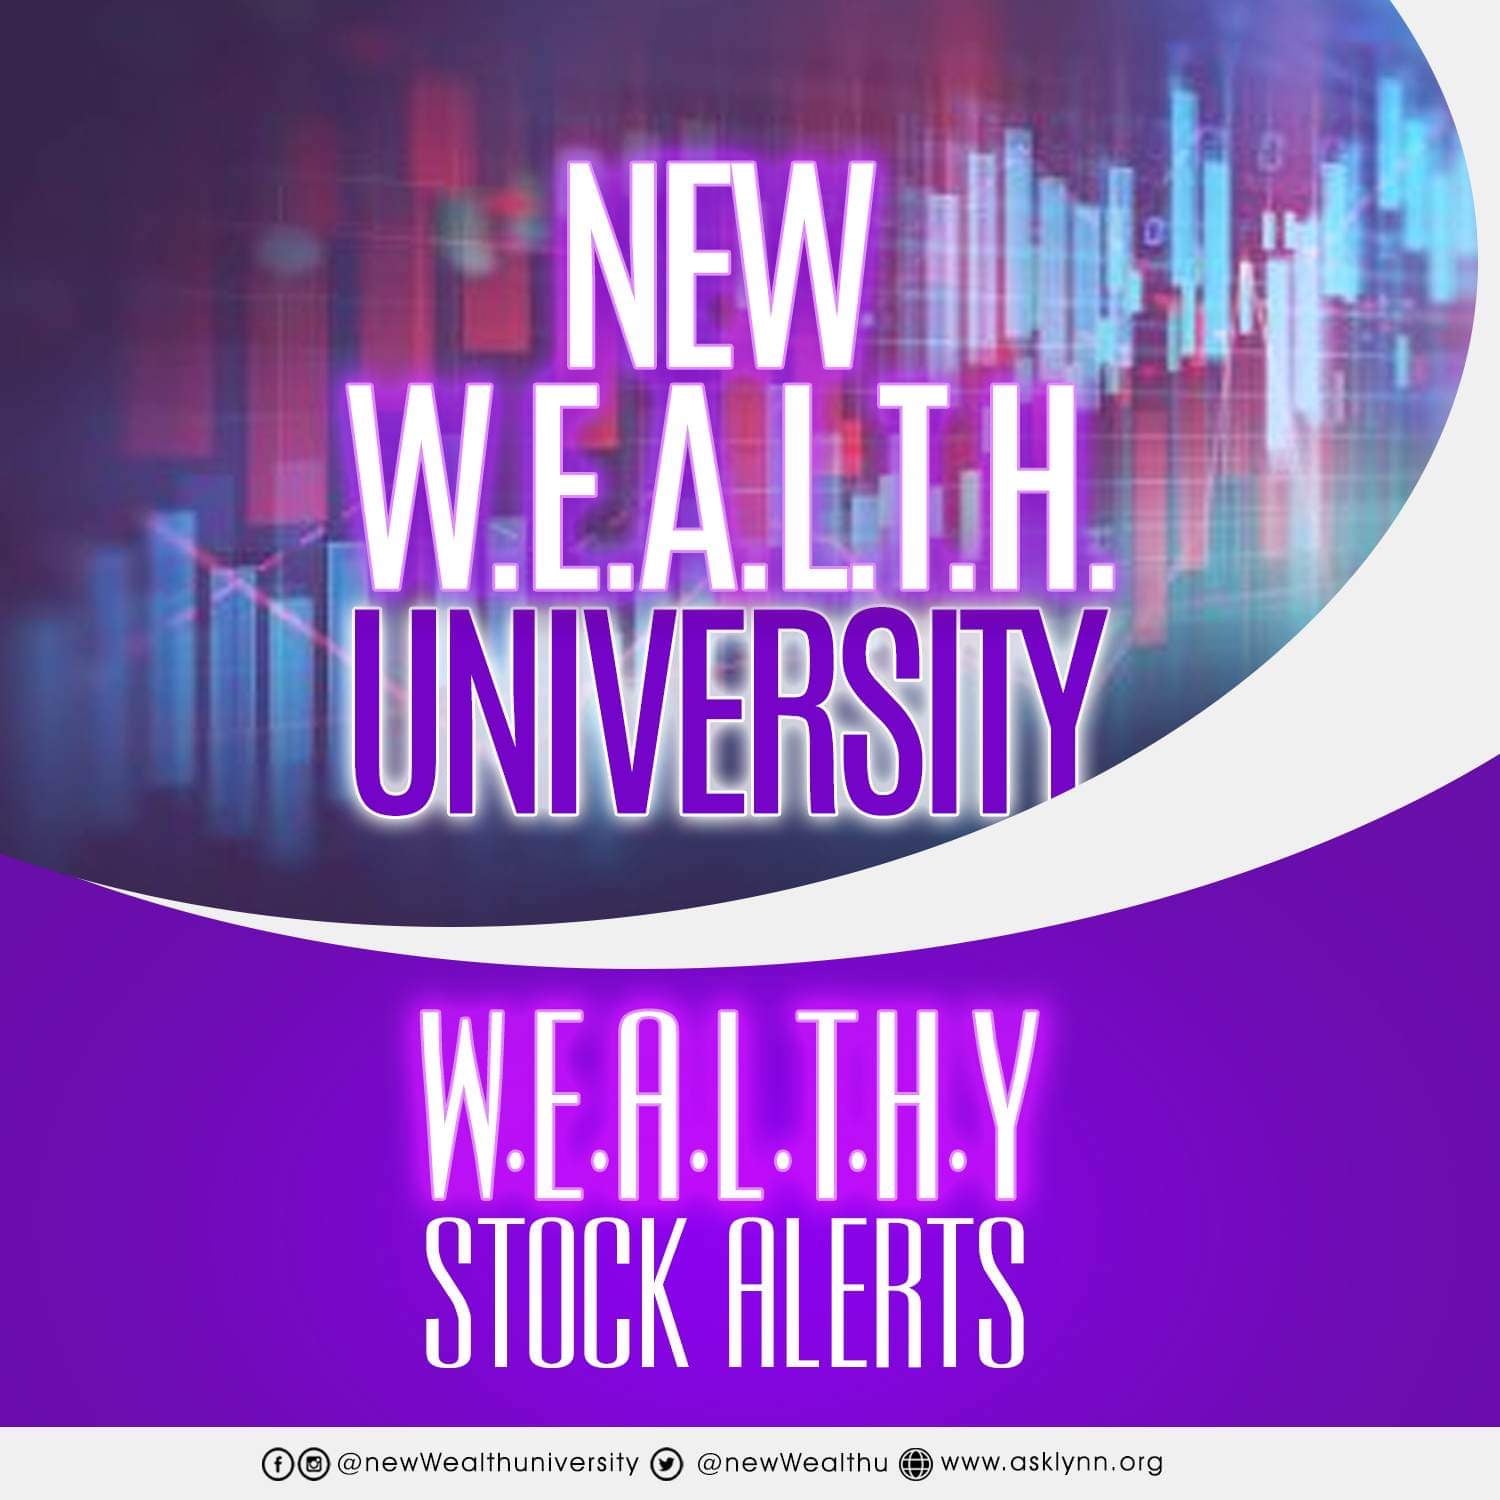 W.E.A.L.T.H.y Stock Alerts - One Year Access